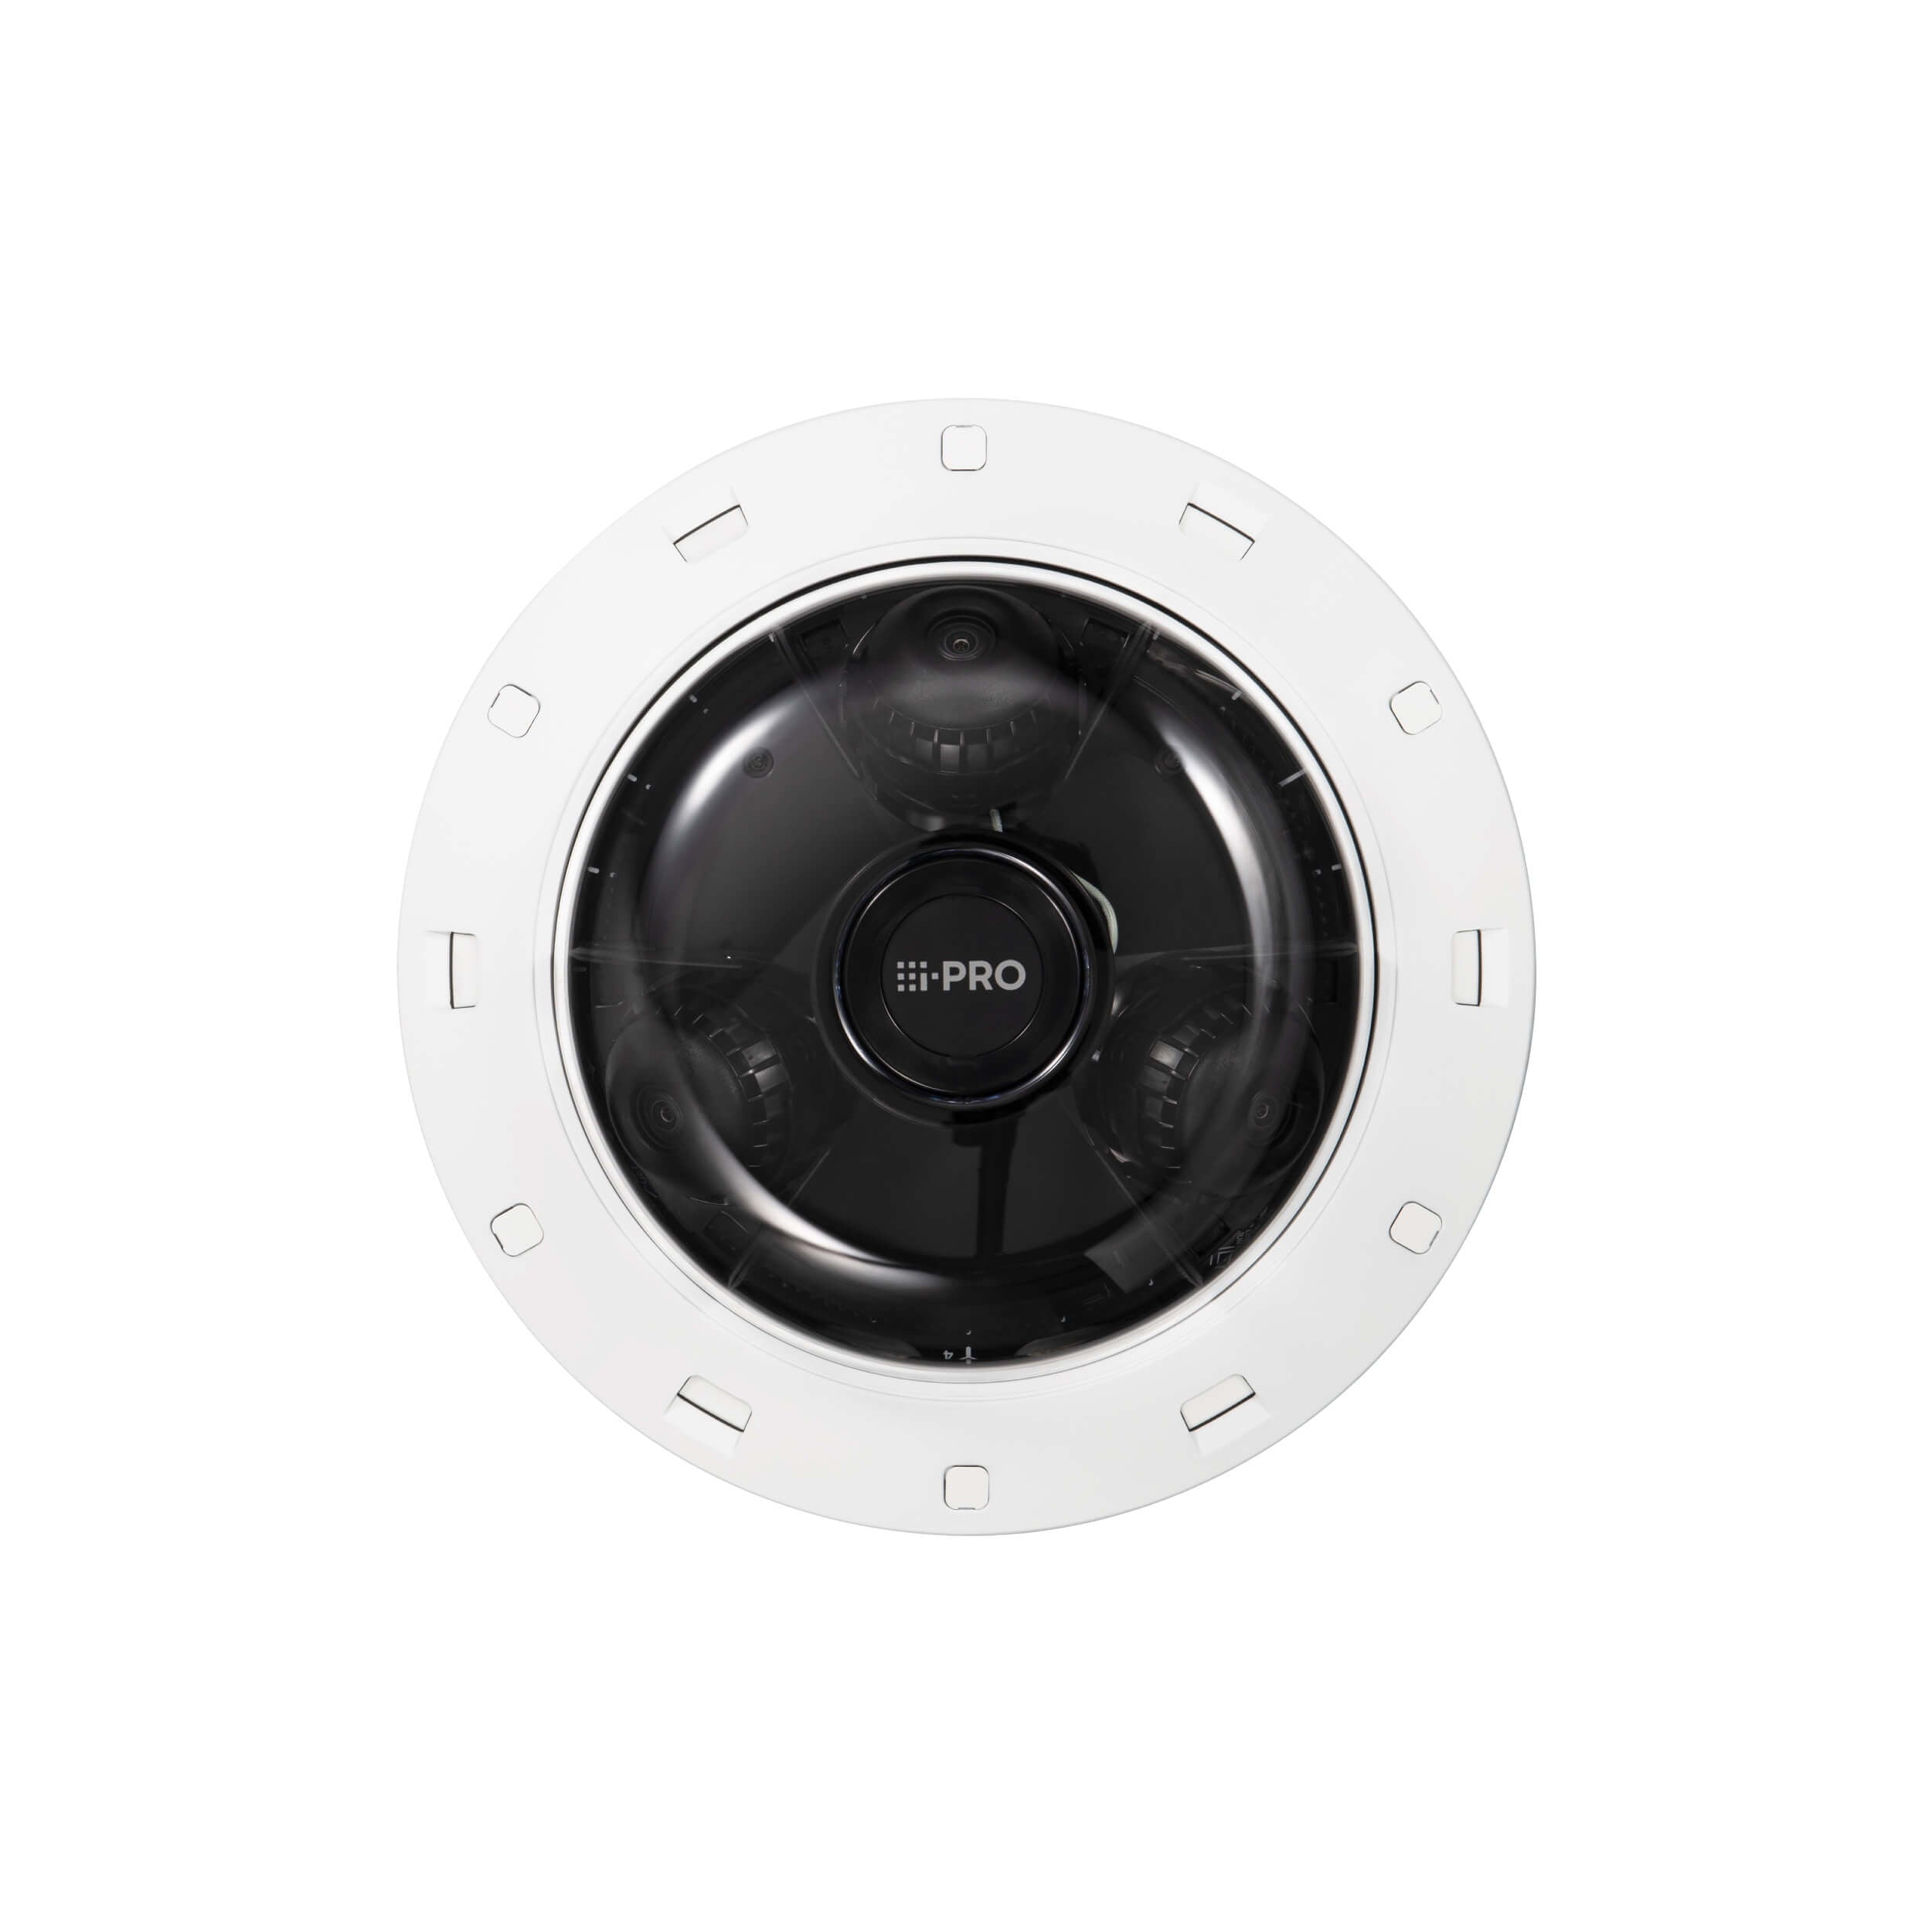 Panasonic WV-S8563LG 19 Megapixel Network IR Outdoor Dome Camera with 3.1mm Lens